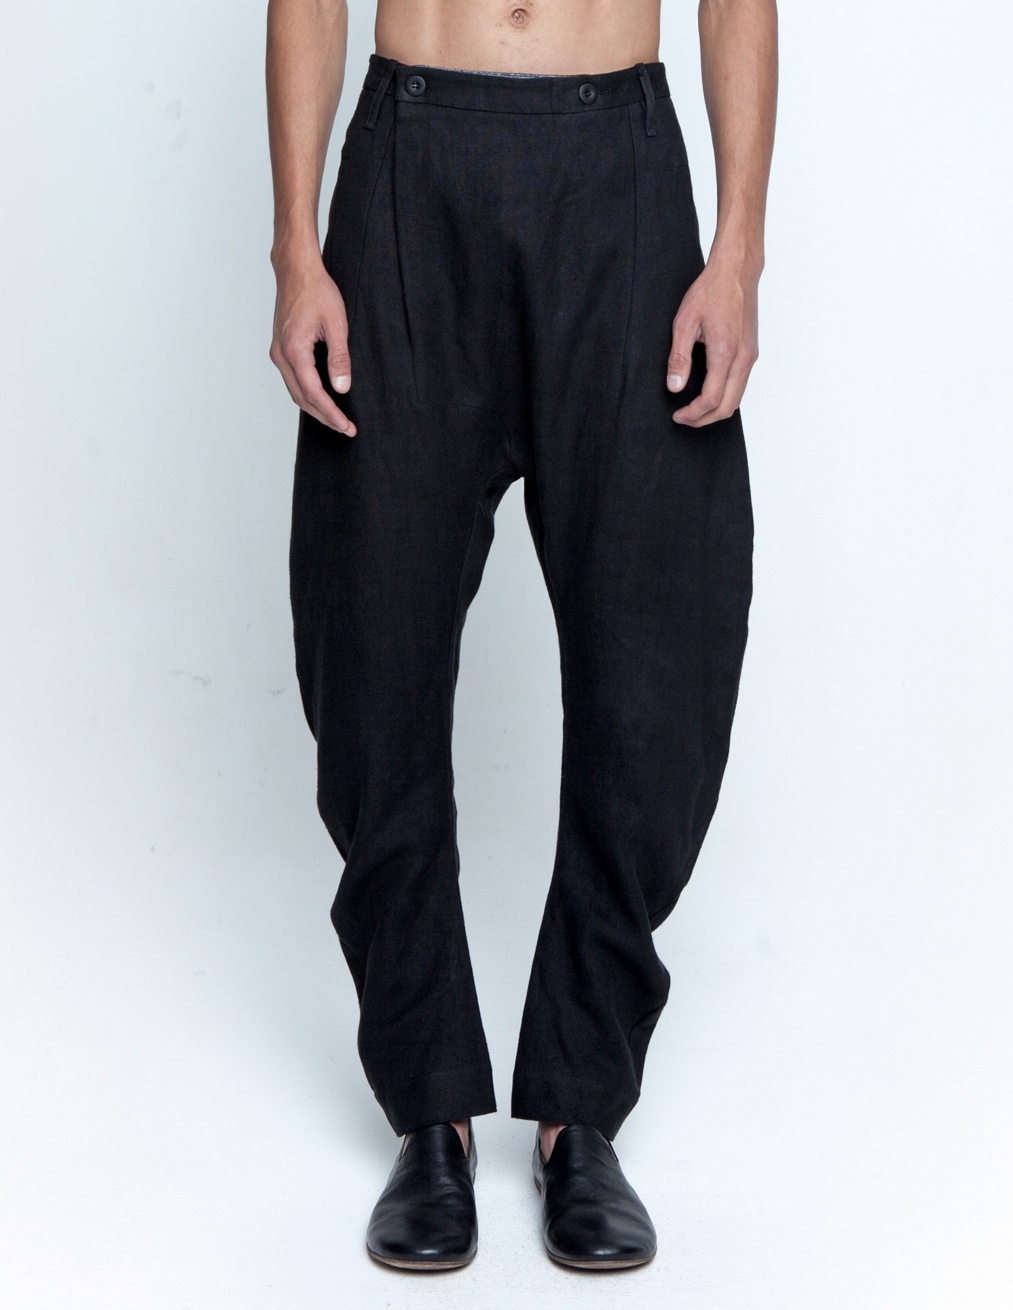 Buy Lost&Found men black low crotch trousers for $635 online on